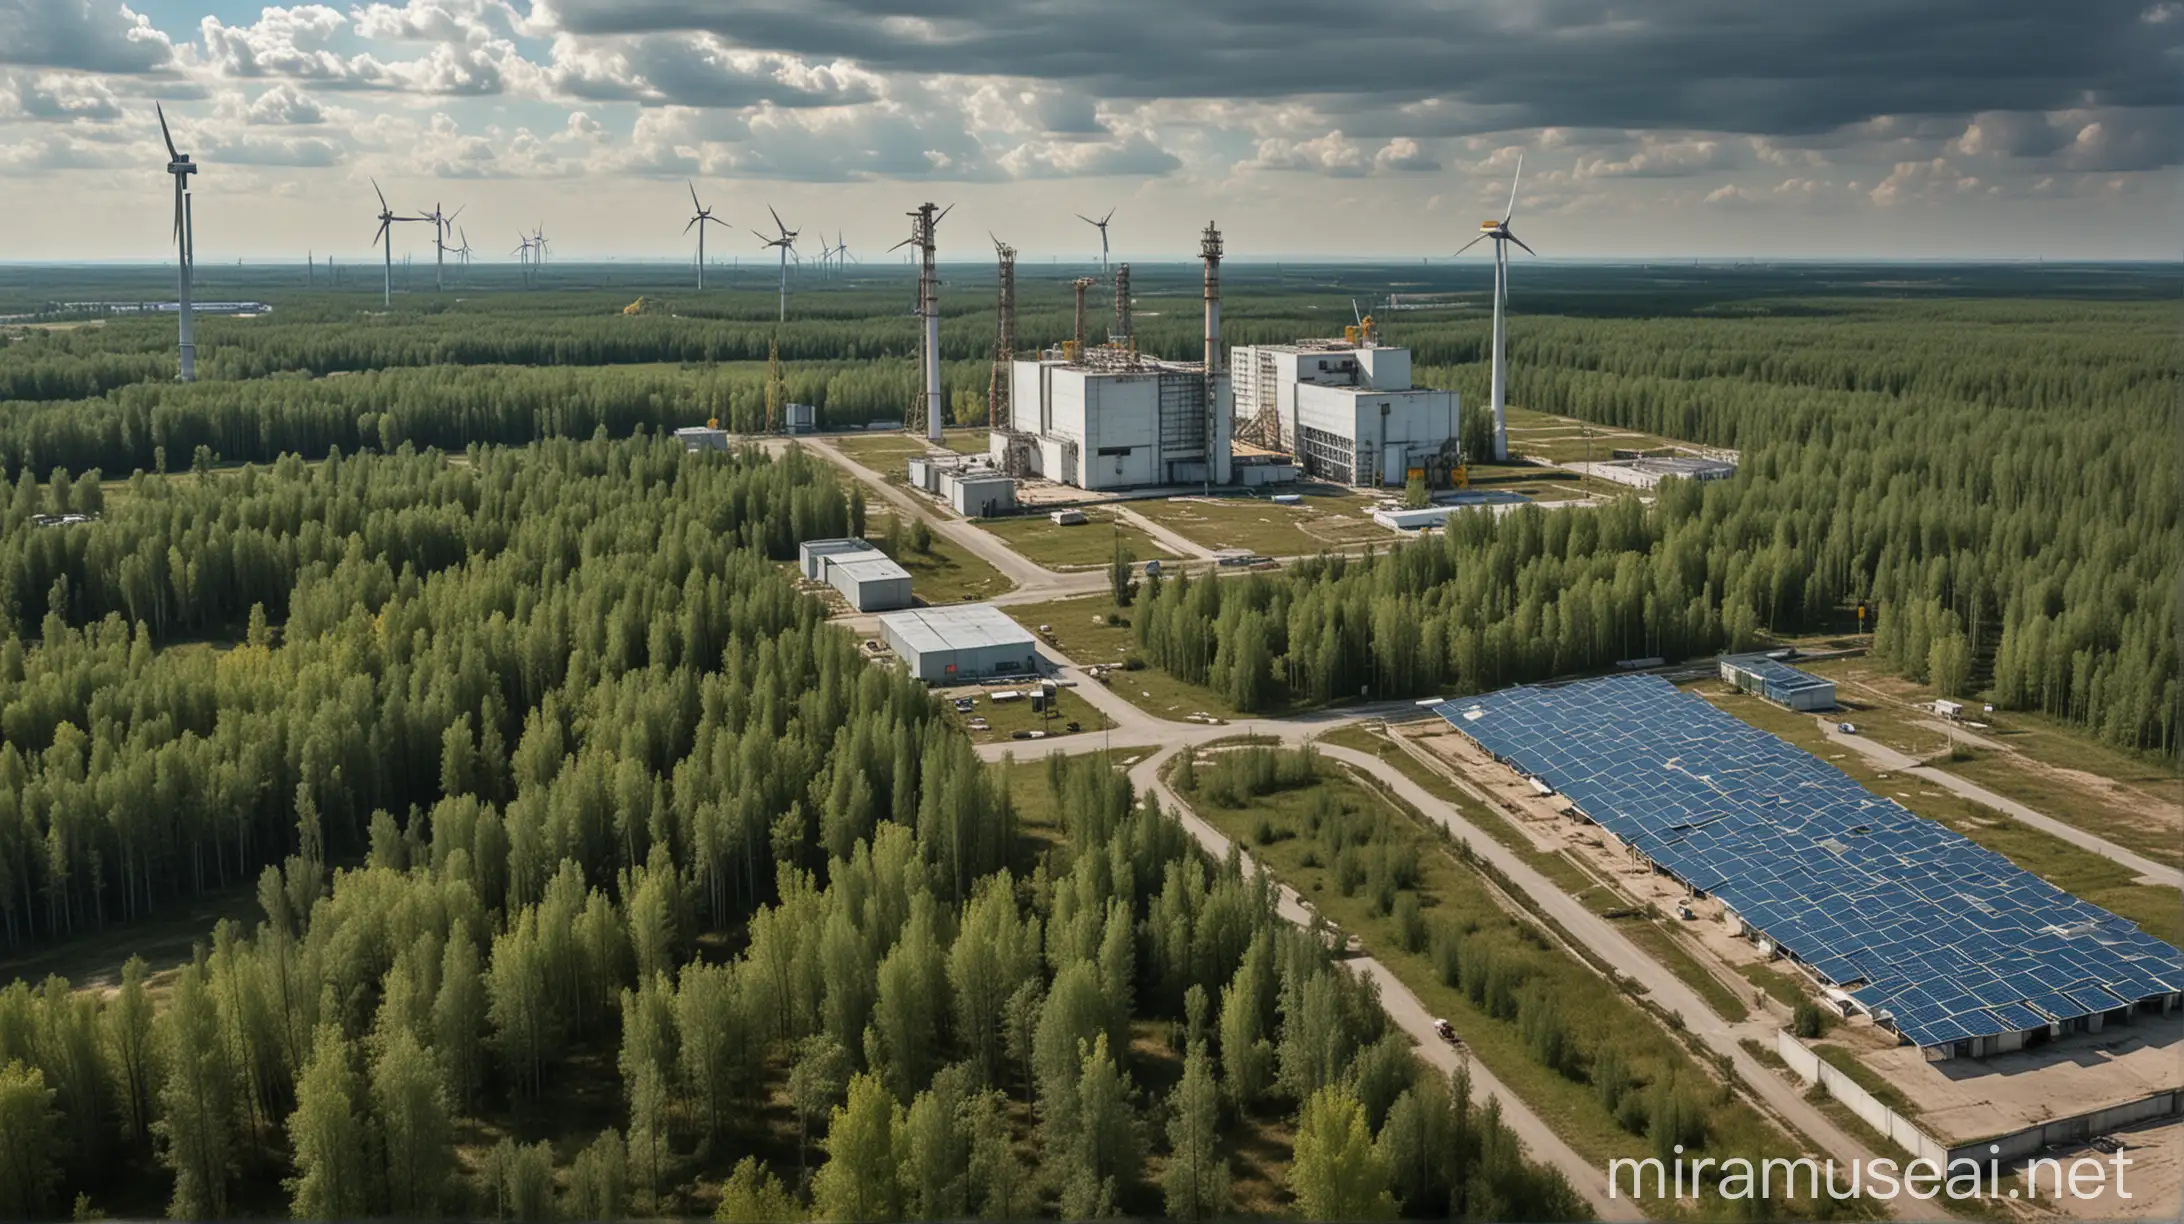 Futuristic Chernobyl Research Lab amidst Renewed Nature and Sustainable Energy